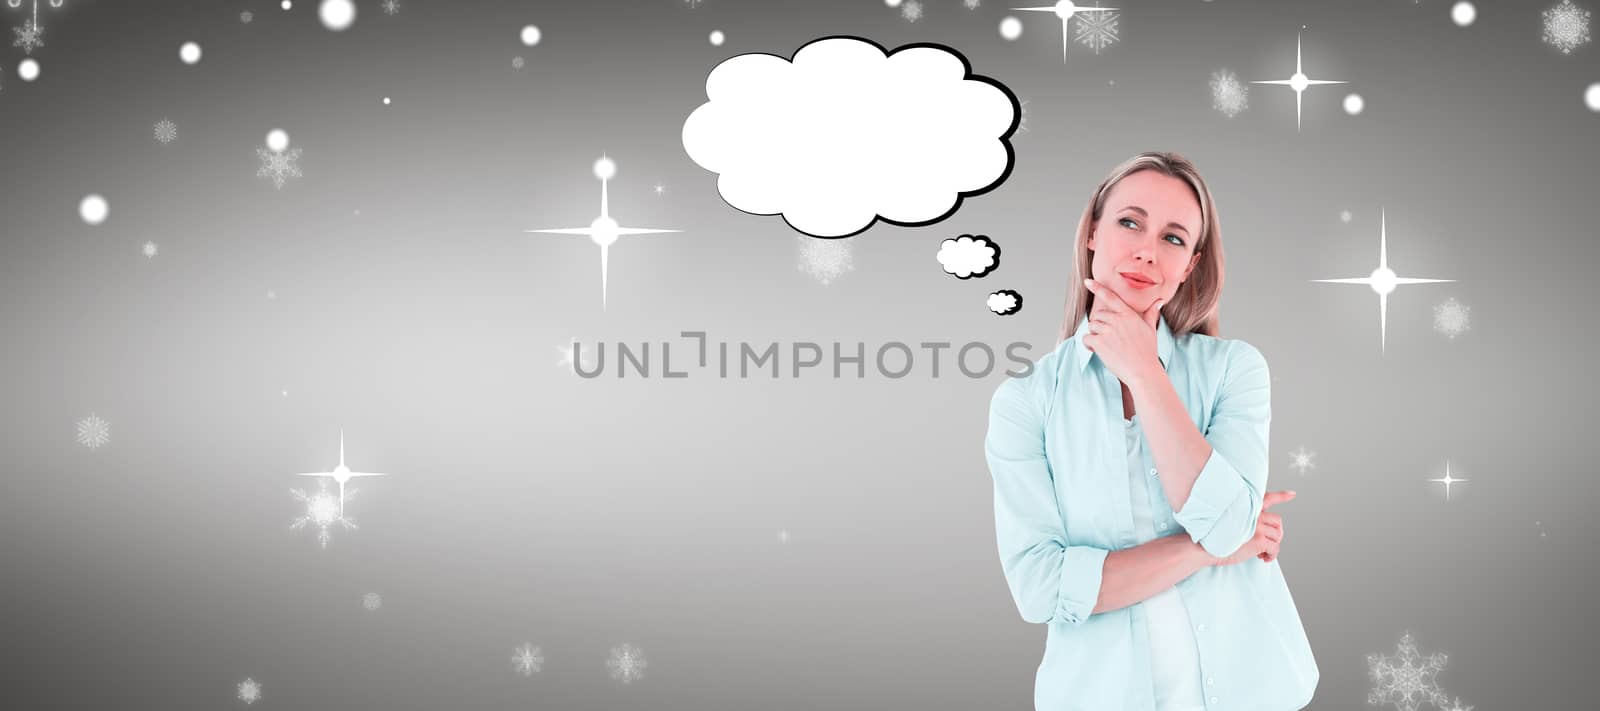 Pretty blonde thinking with hand on chin against grey vignette